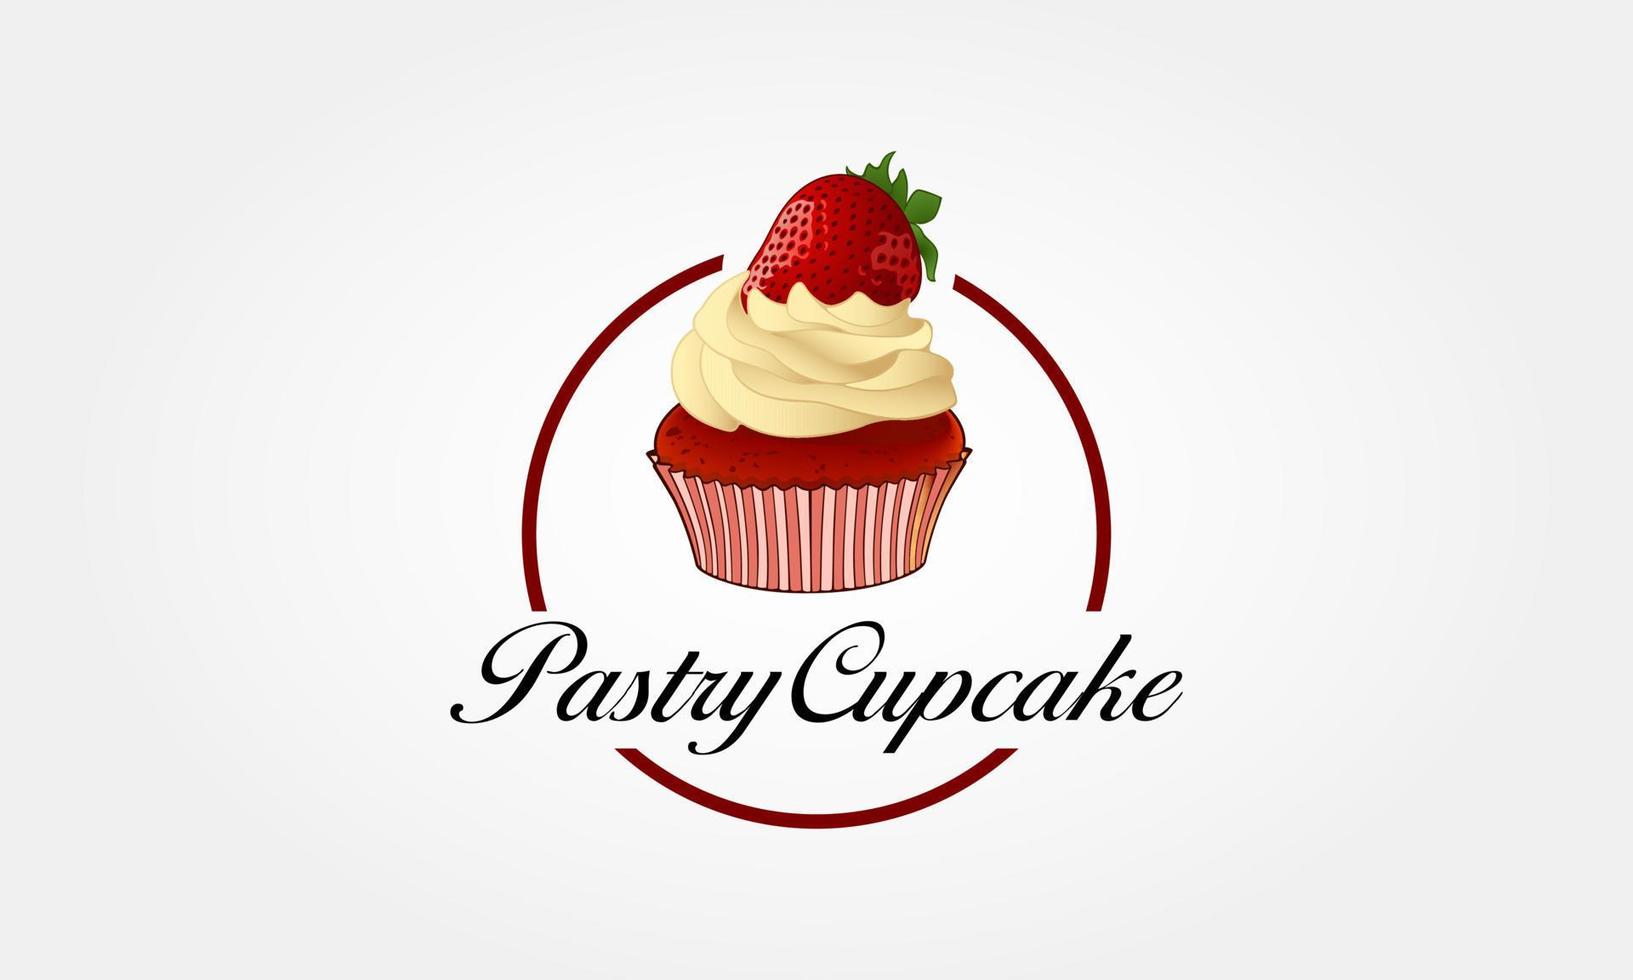 Pastry Cupcake Vector Logo Illustration. Cupcake Bakery Stylish Logo Template. This sign is cute sign that consists of cupcake icon, decorative design elements.